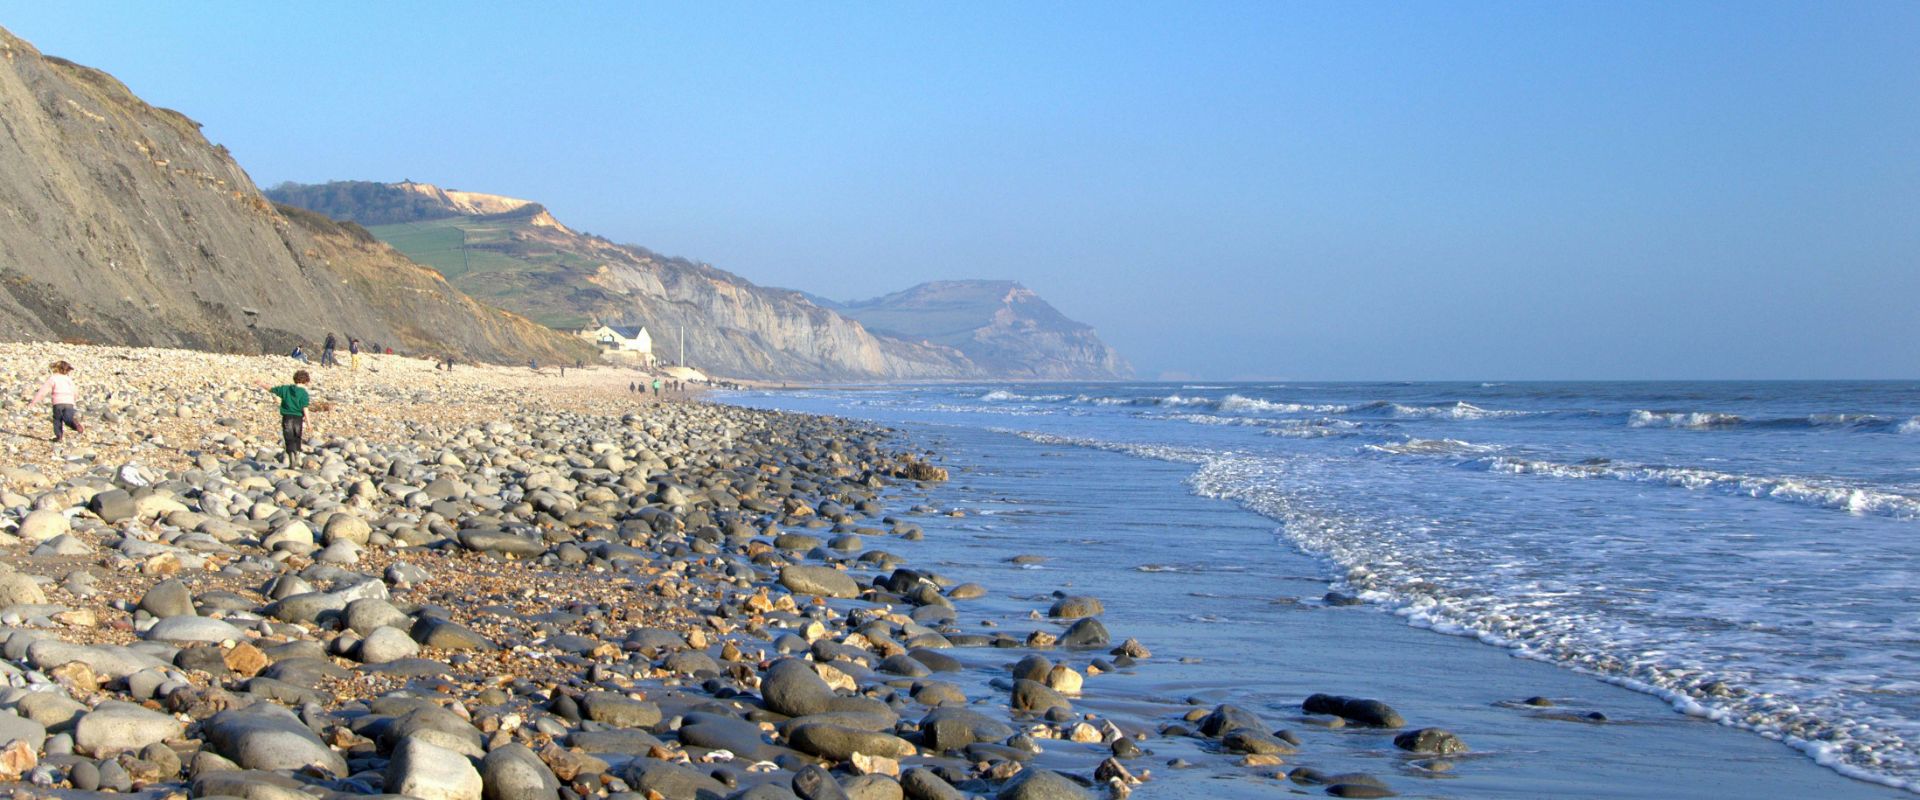 The view along Charmouth Beach in Dorset